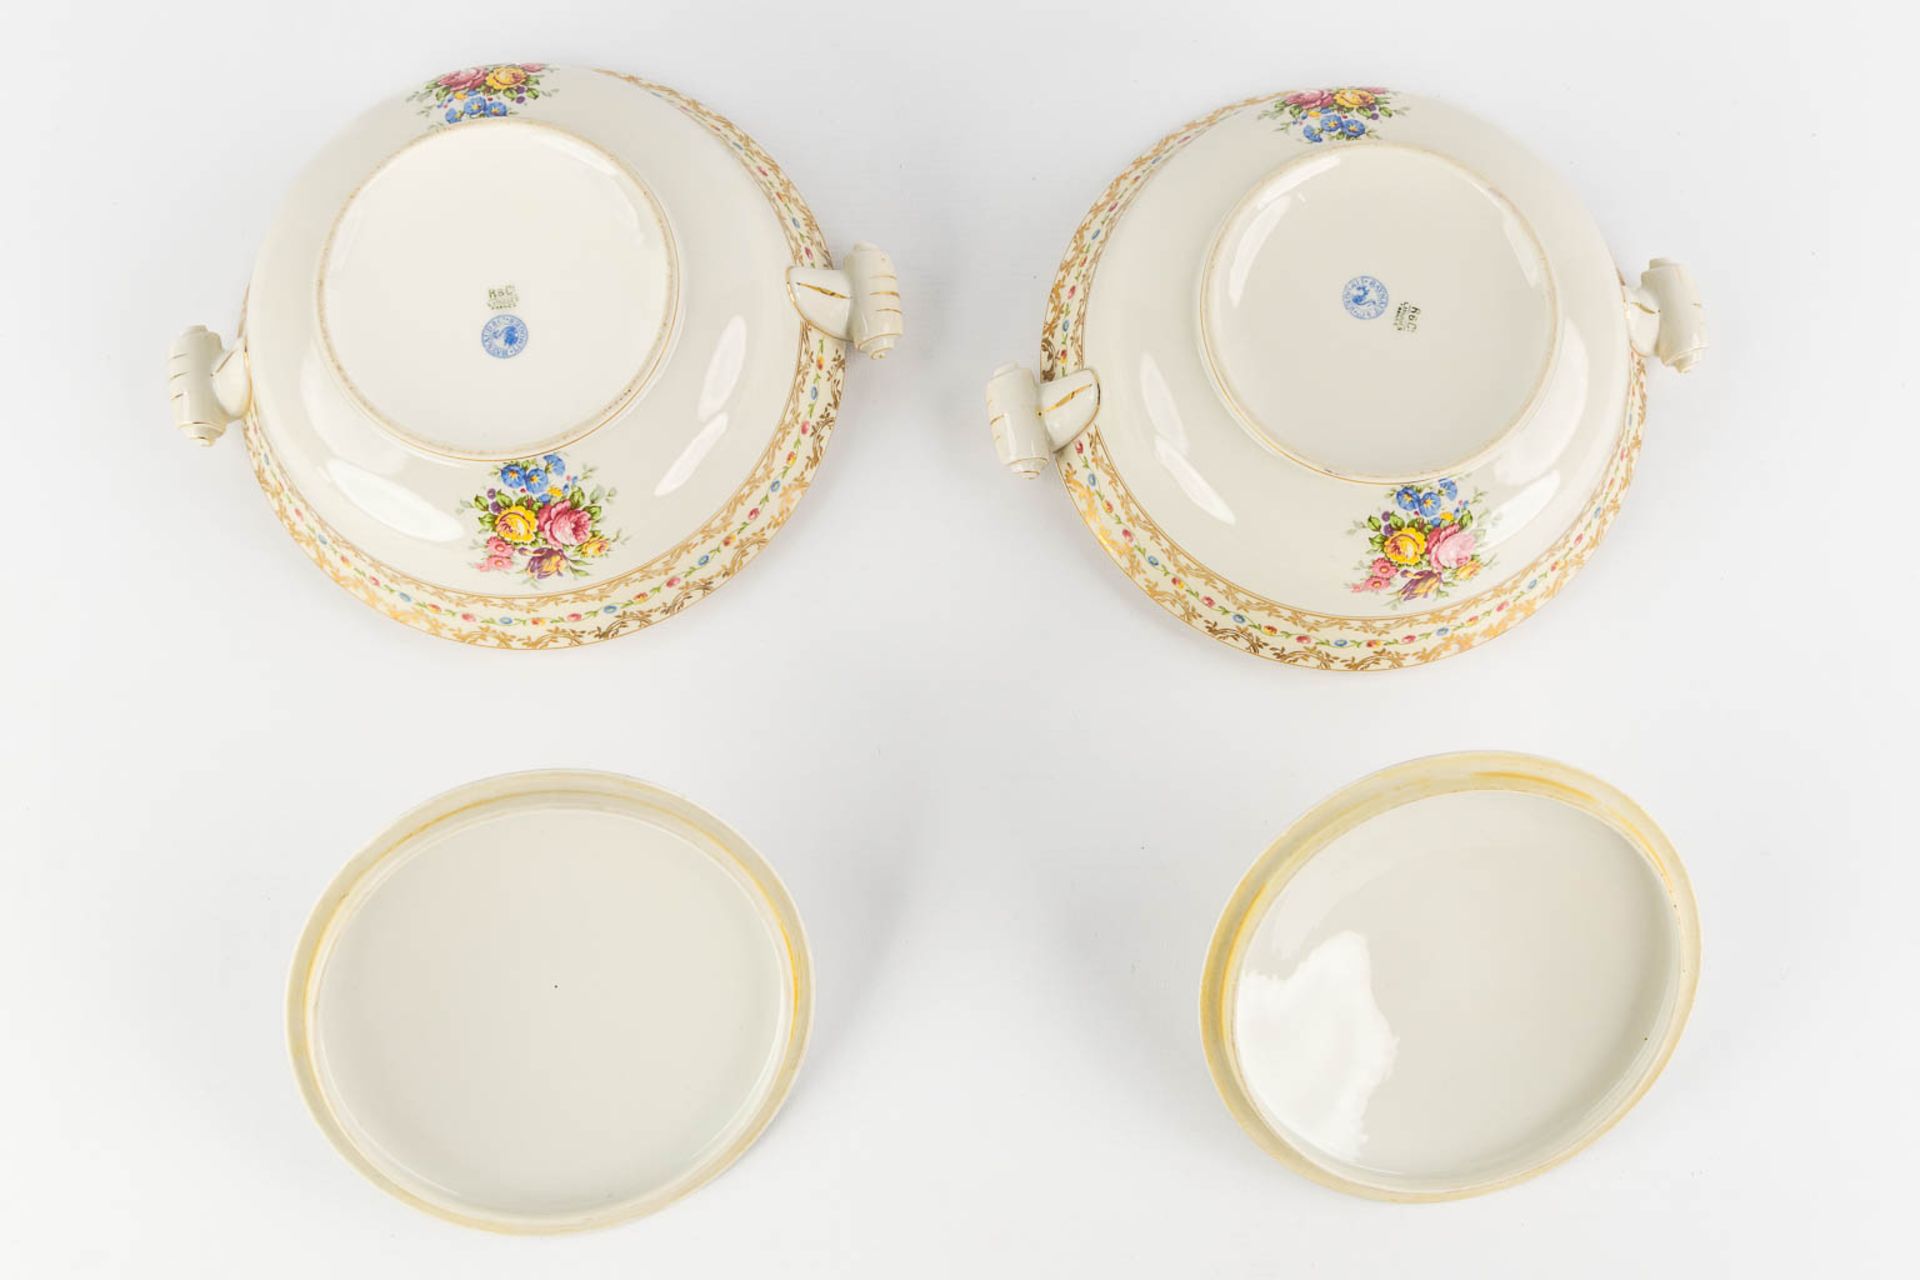 Raynaud, Limoges, a large dinner service. (L:25 x W:35 cm) - Image 10 of 16